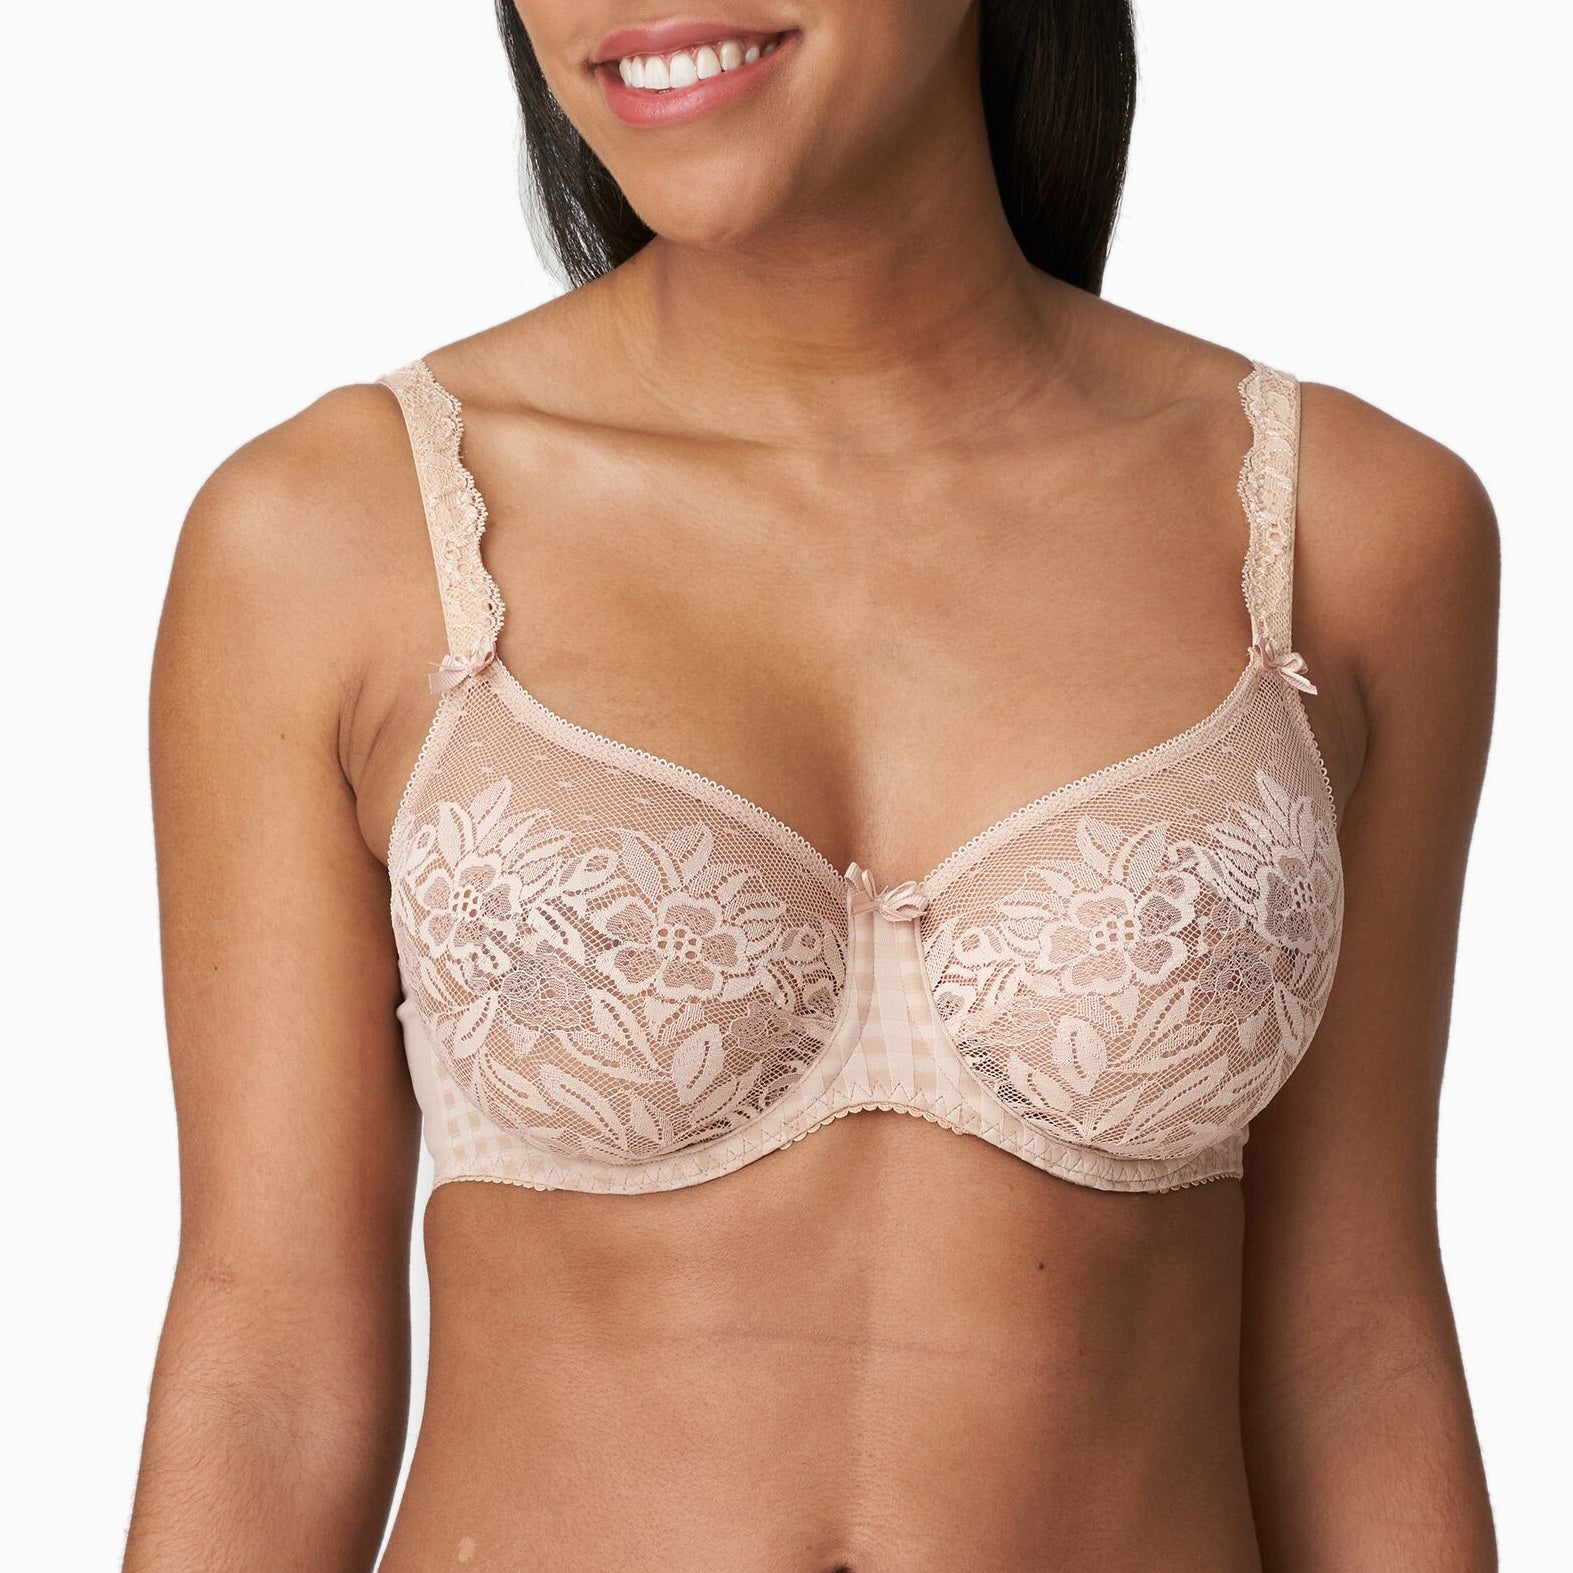 Padded underwired E/F cup bra - Black - Ladies